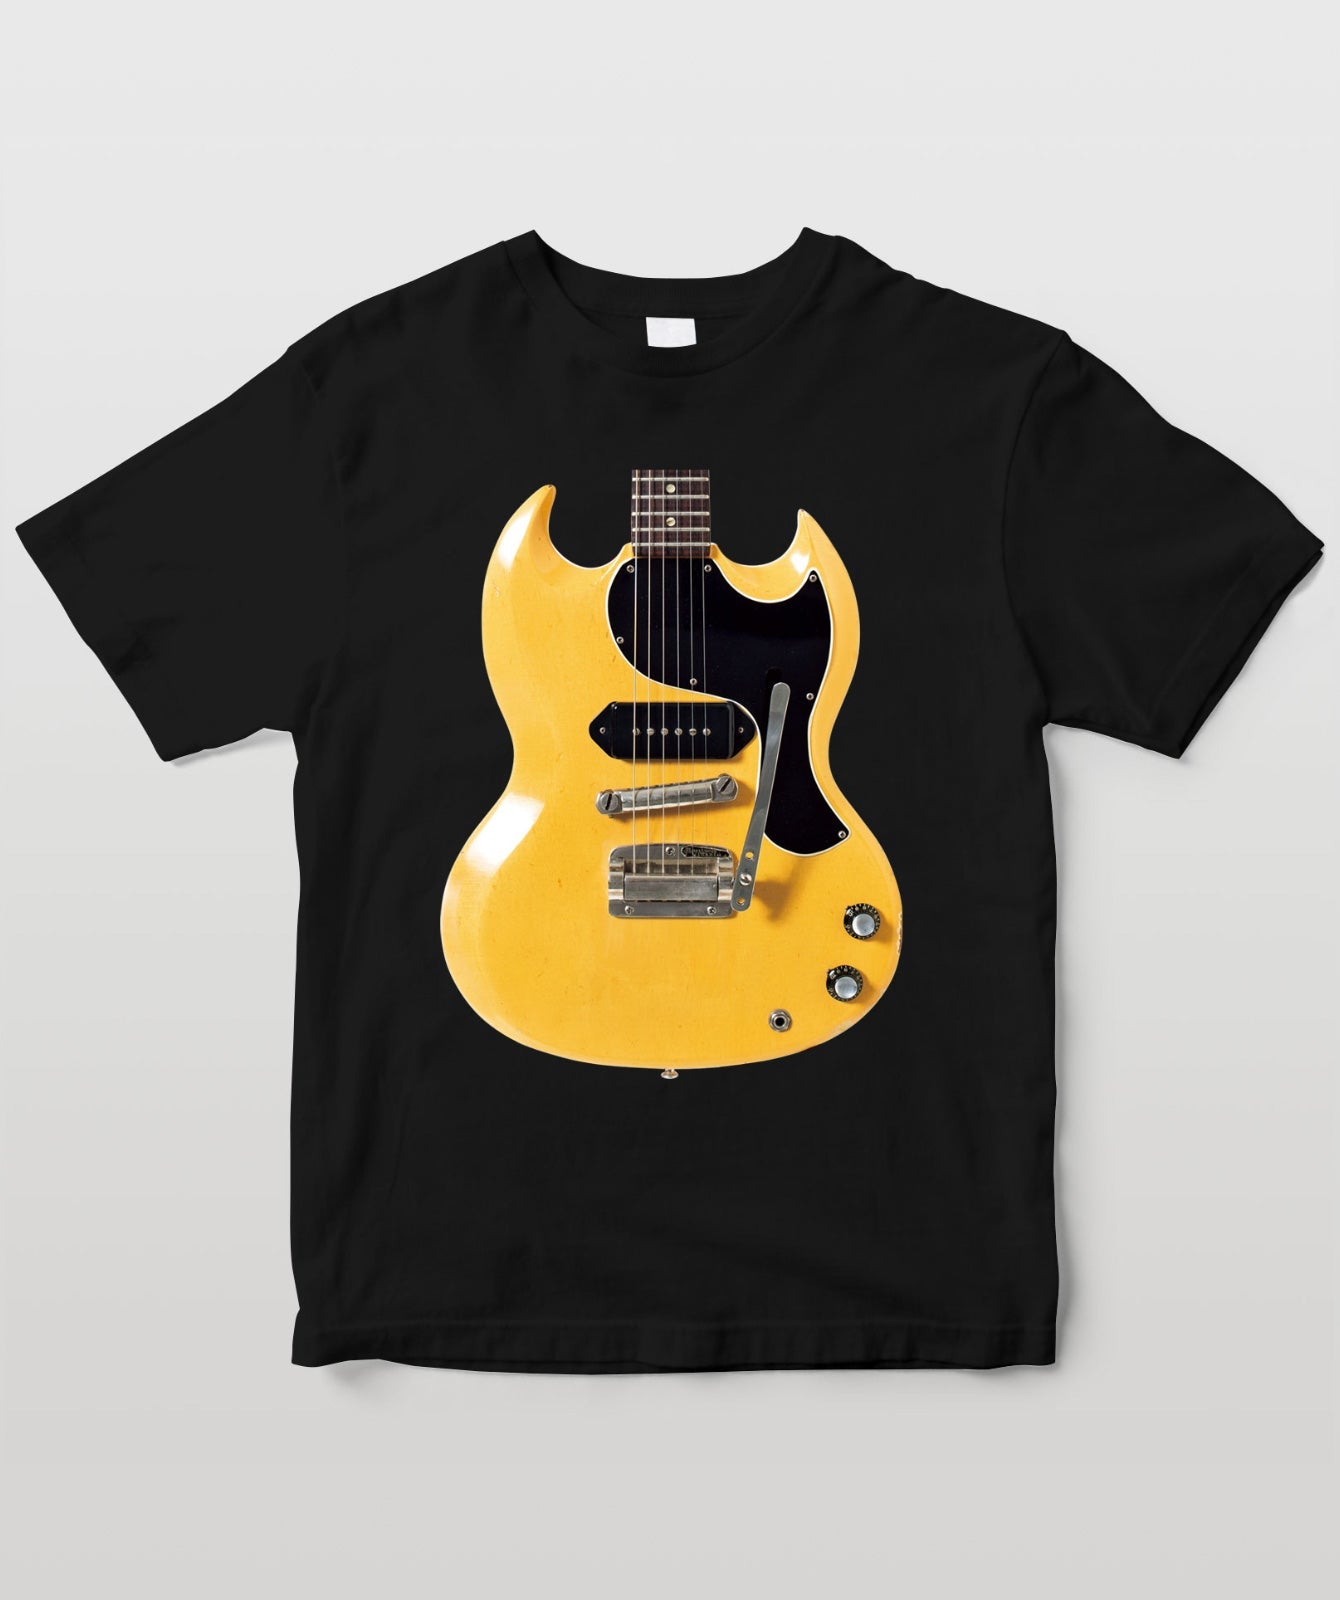 Gibson SG Player’s Book Tシャツ 1961 SG TV